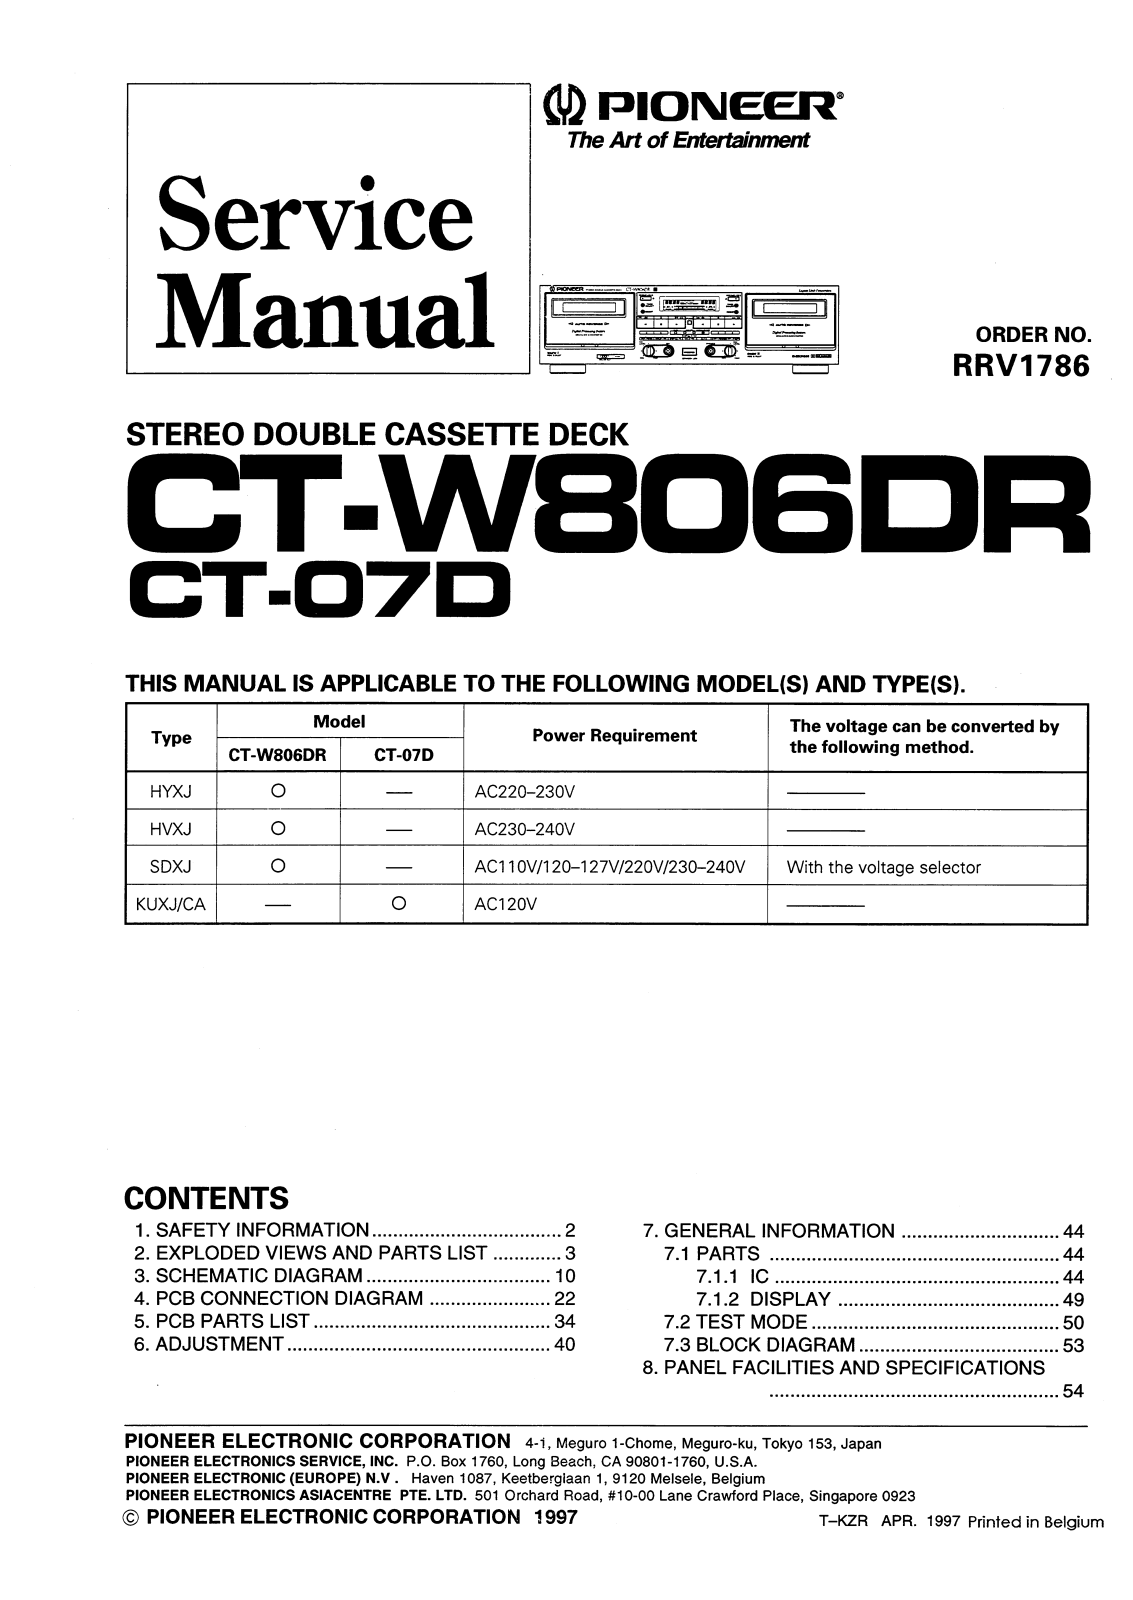 Pioneer CT-07-D, CTW-806-DR Service manual